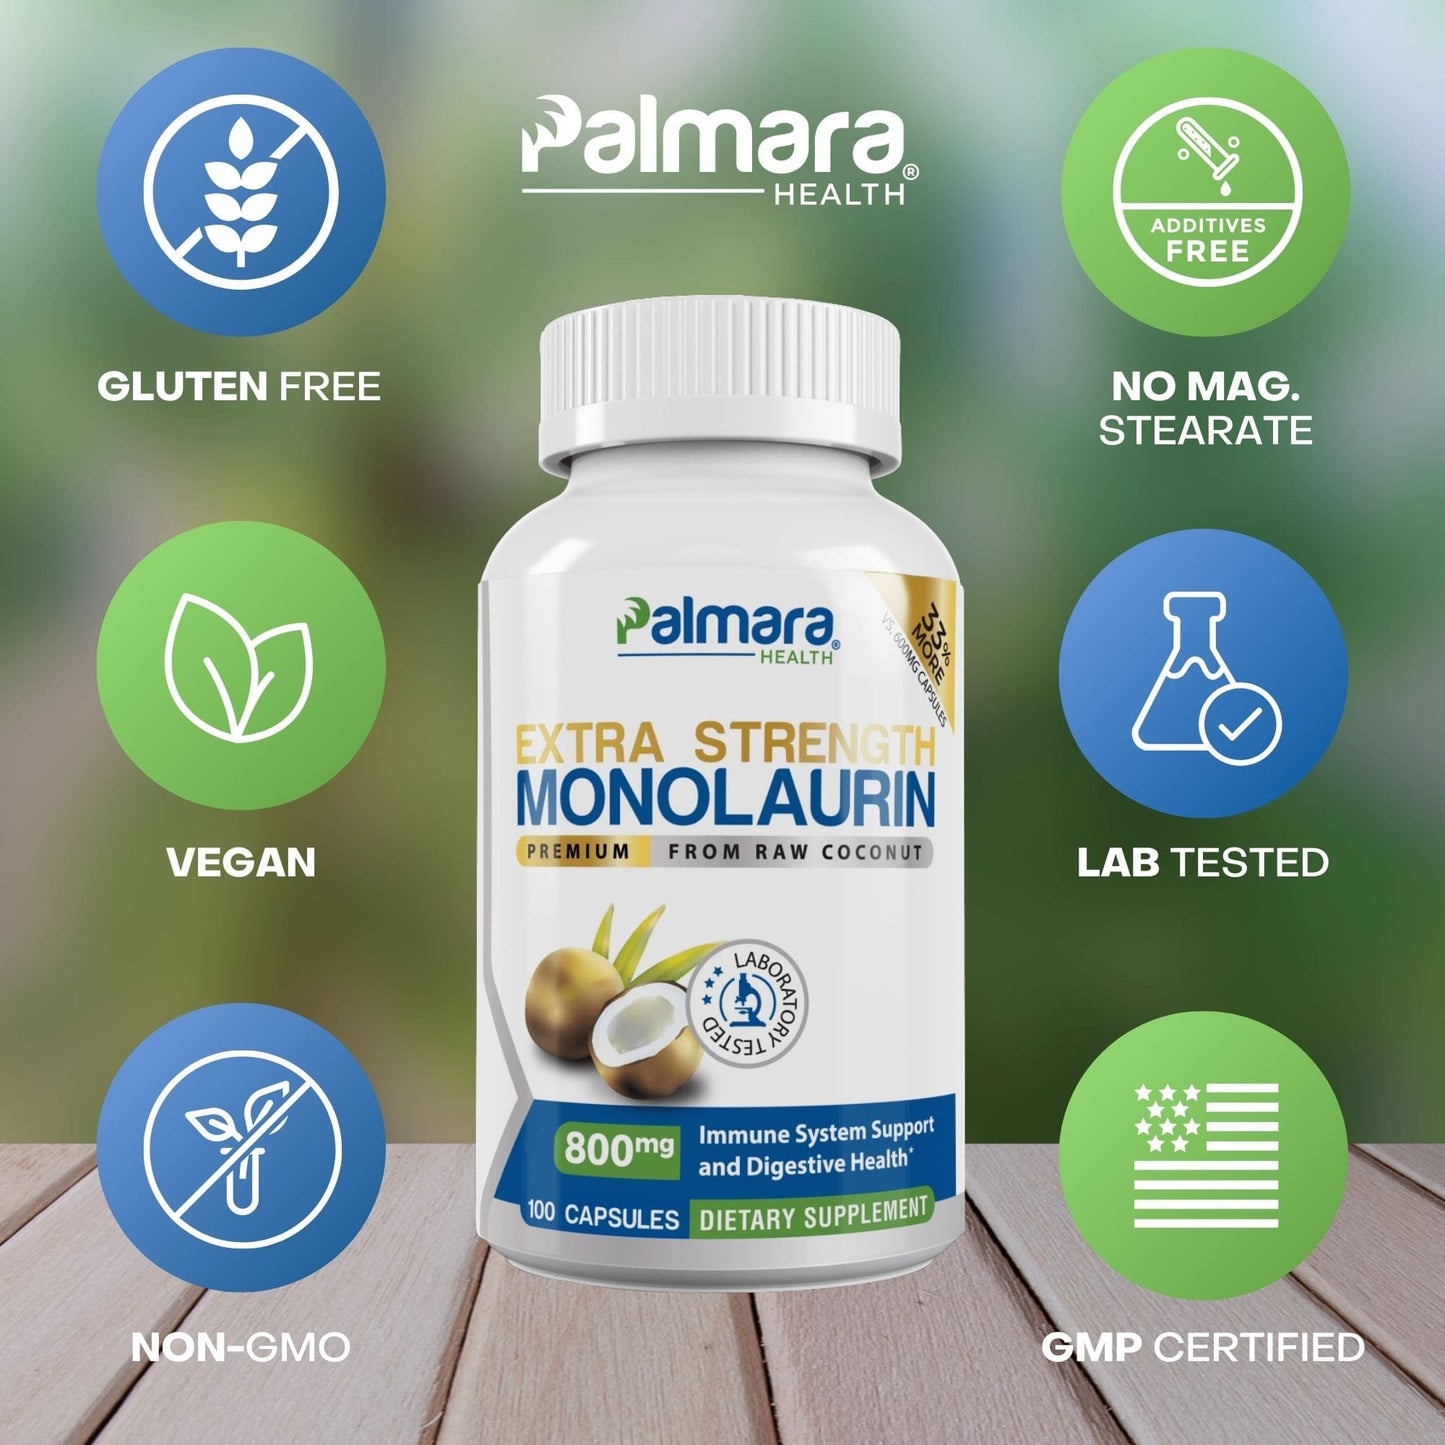 
                  
                    Palmara Health's commitment to excellence is evident in their Monolaurin supplement, which is certified gluten-free, vegan, and non-GMO, ensuring top-tier monolaurin supplement benefits for consumers.
                  
                